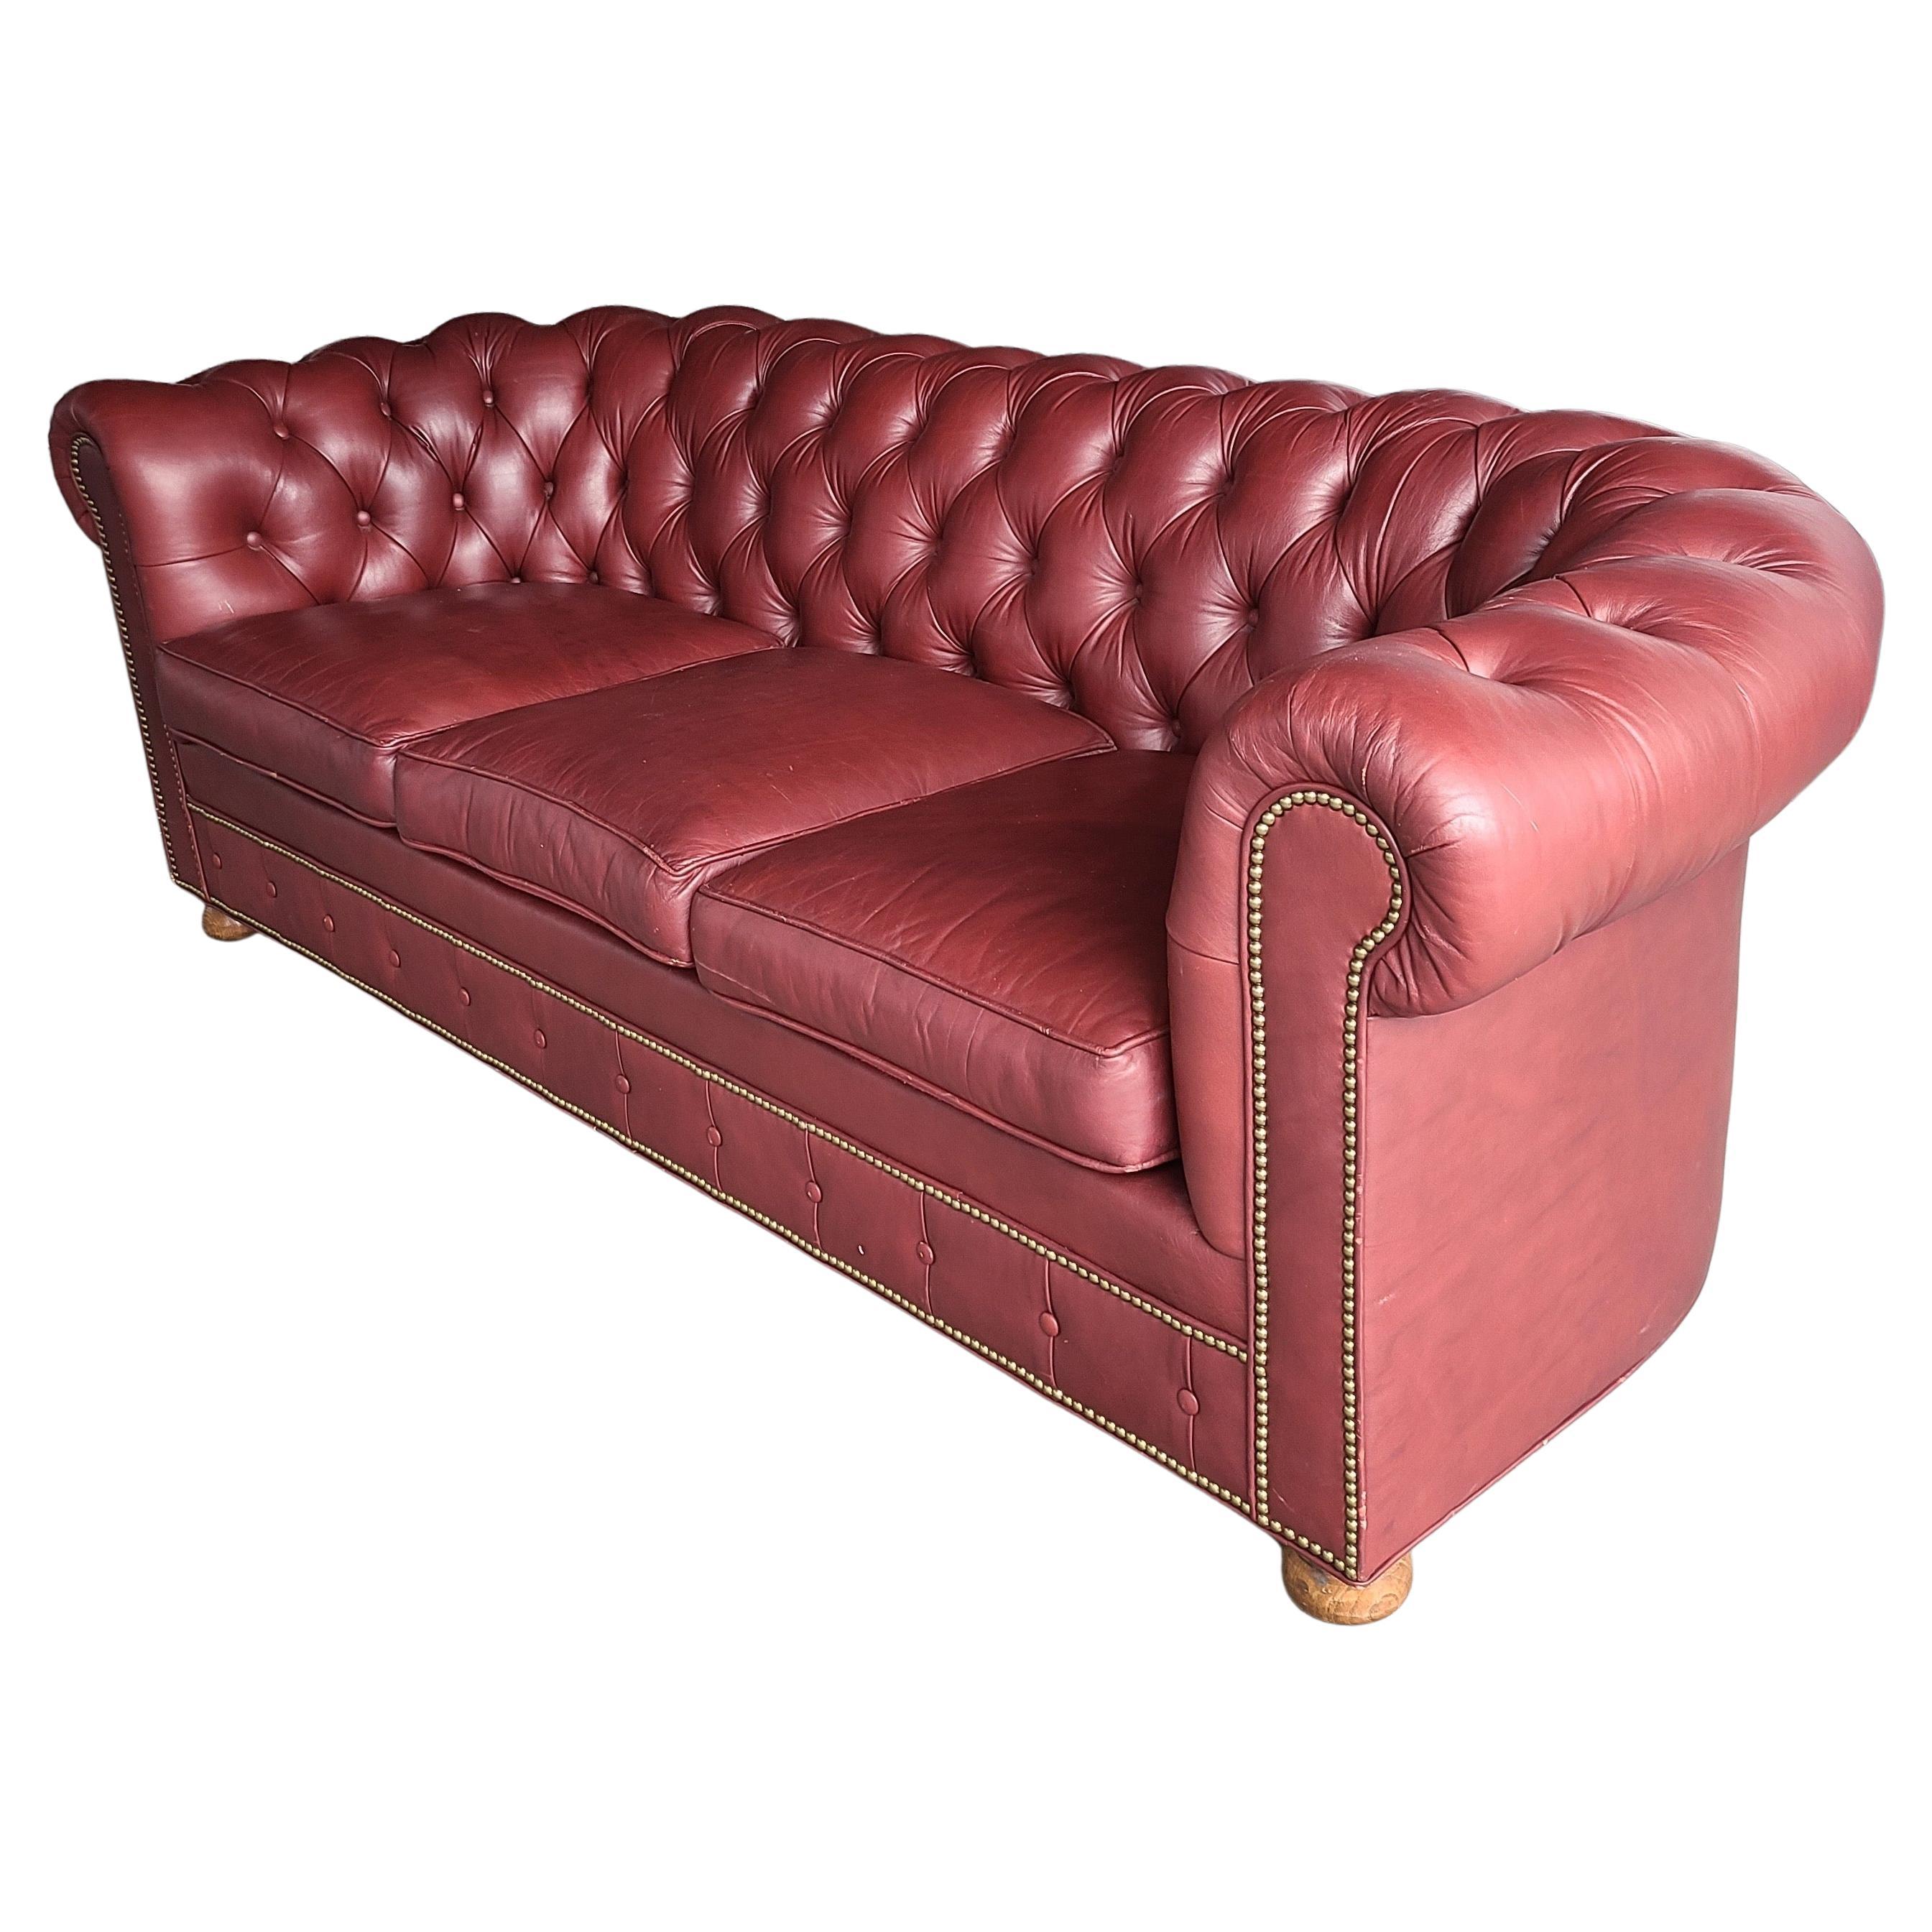 Please message us for a cost effective shipping quote to your location.

Button tufted leather Chesterfield Sofa by Alex Stuart Designs.